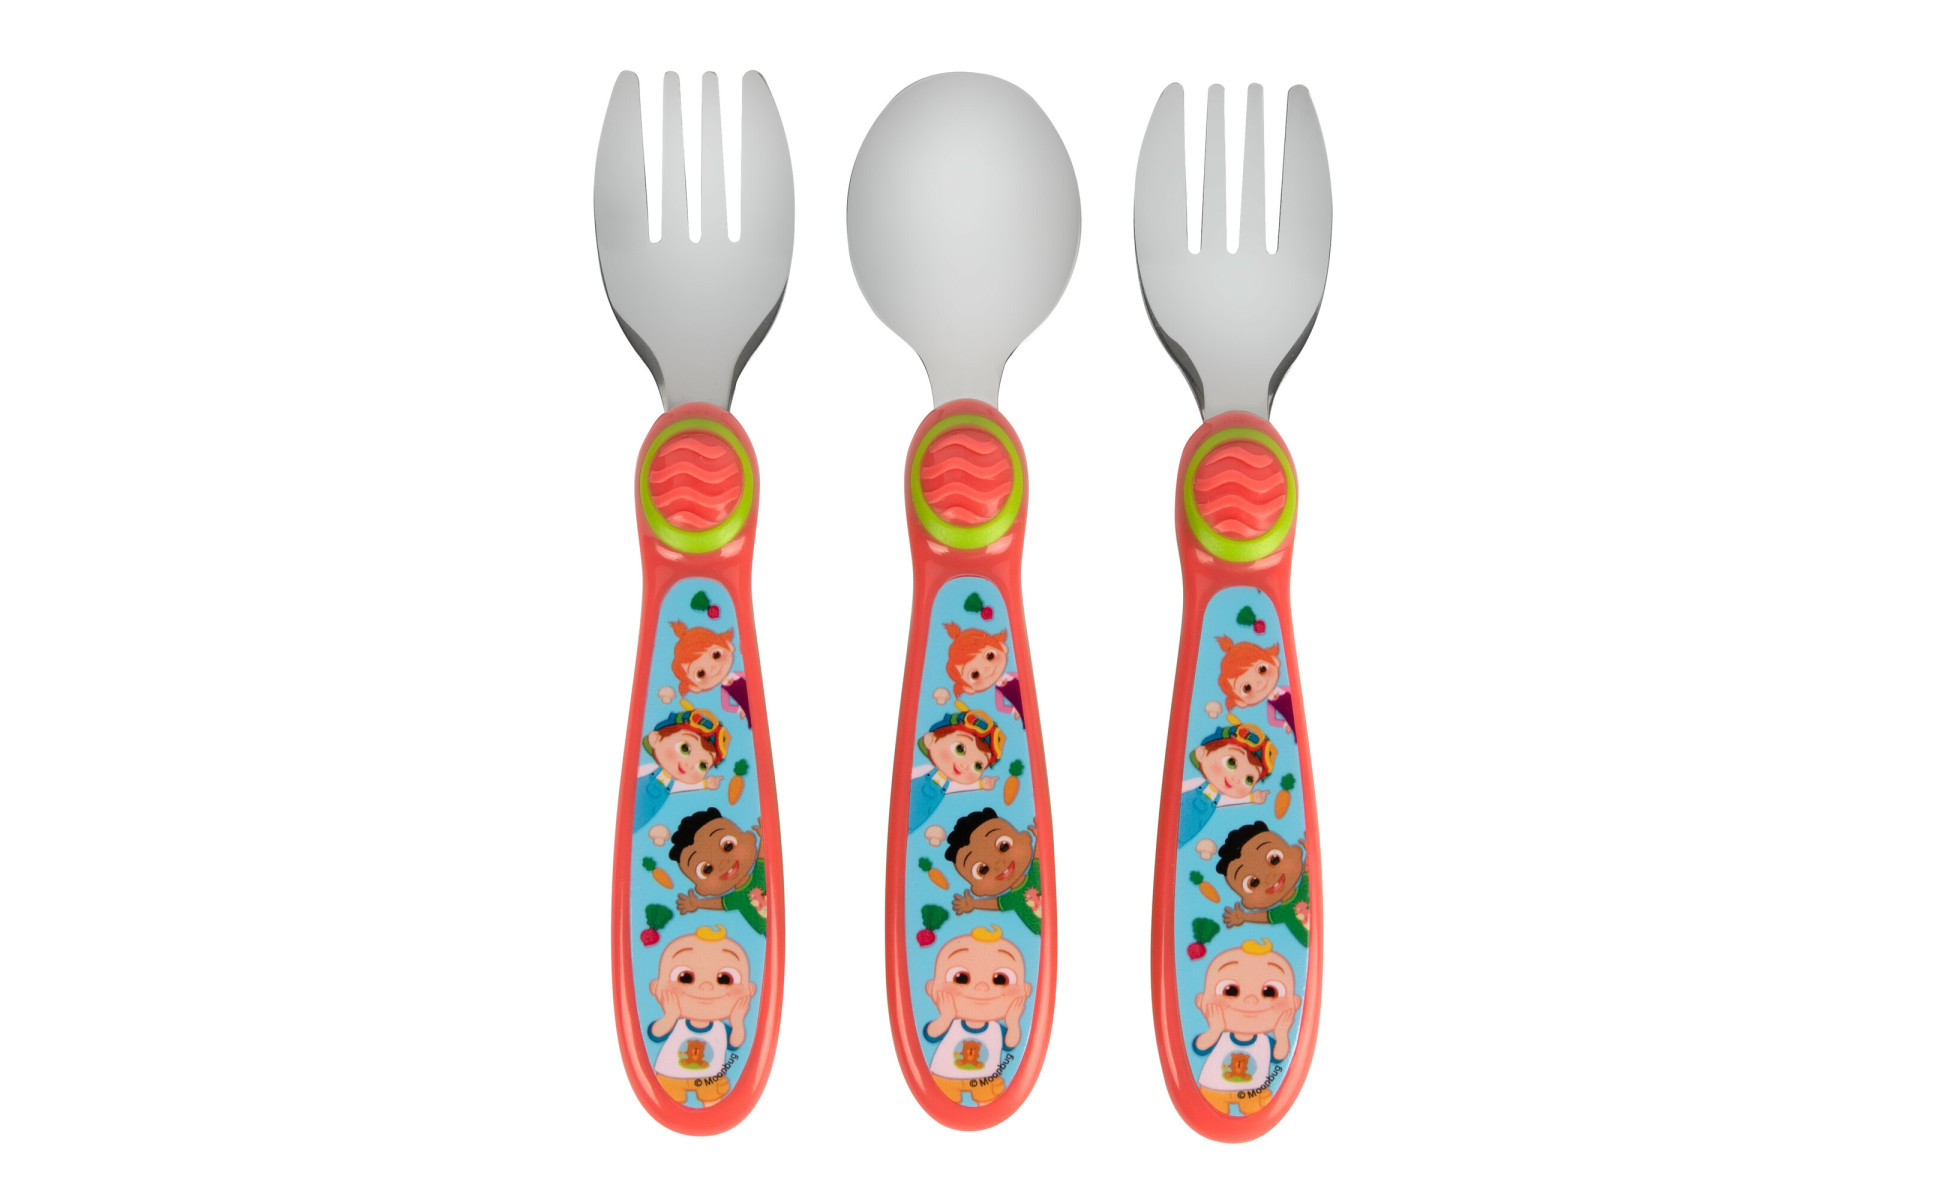 HEQUSIGNS 3Pairs Toddler Spoons and Forks Set, Stainless Steel Kids Utensils  with Portable Travel Case, Silverware and Dishes for Baby Self-Feeding 